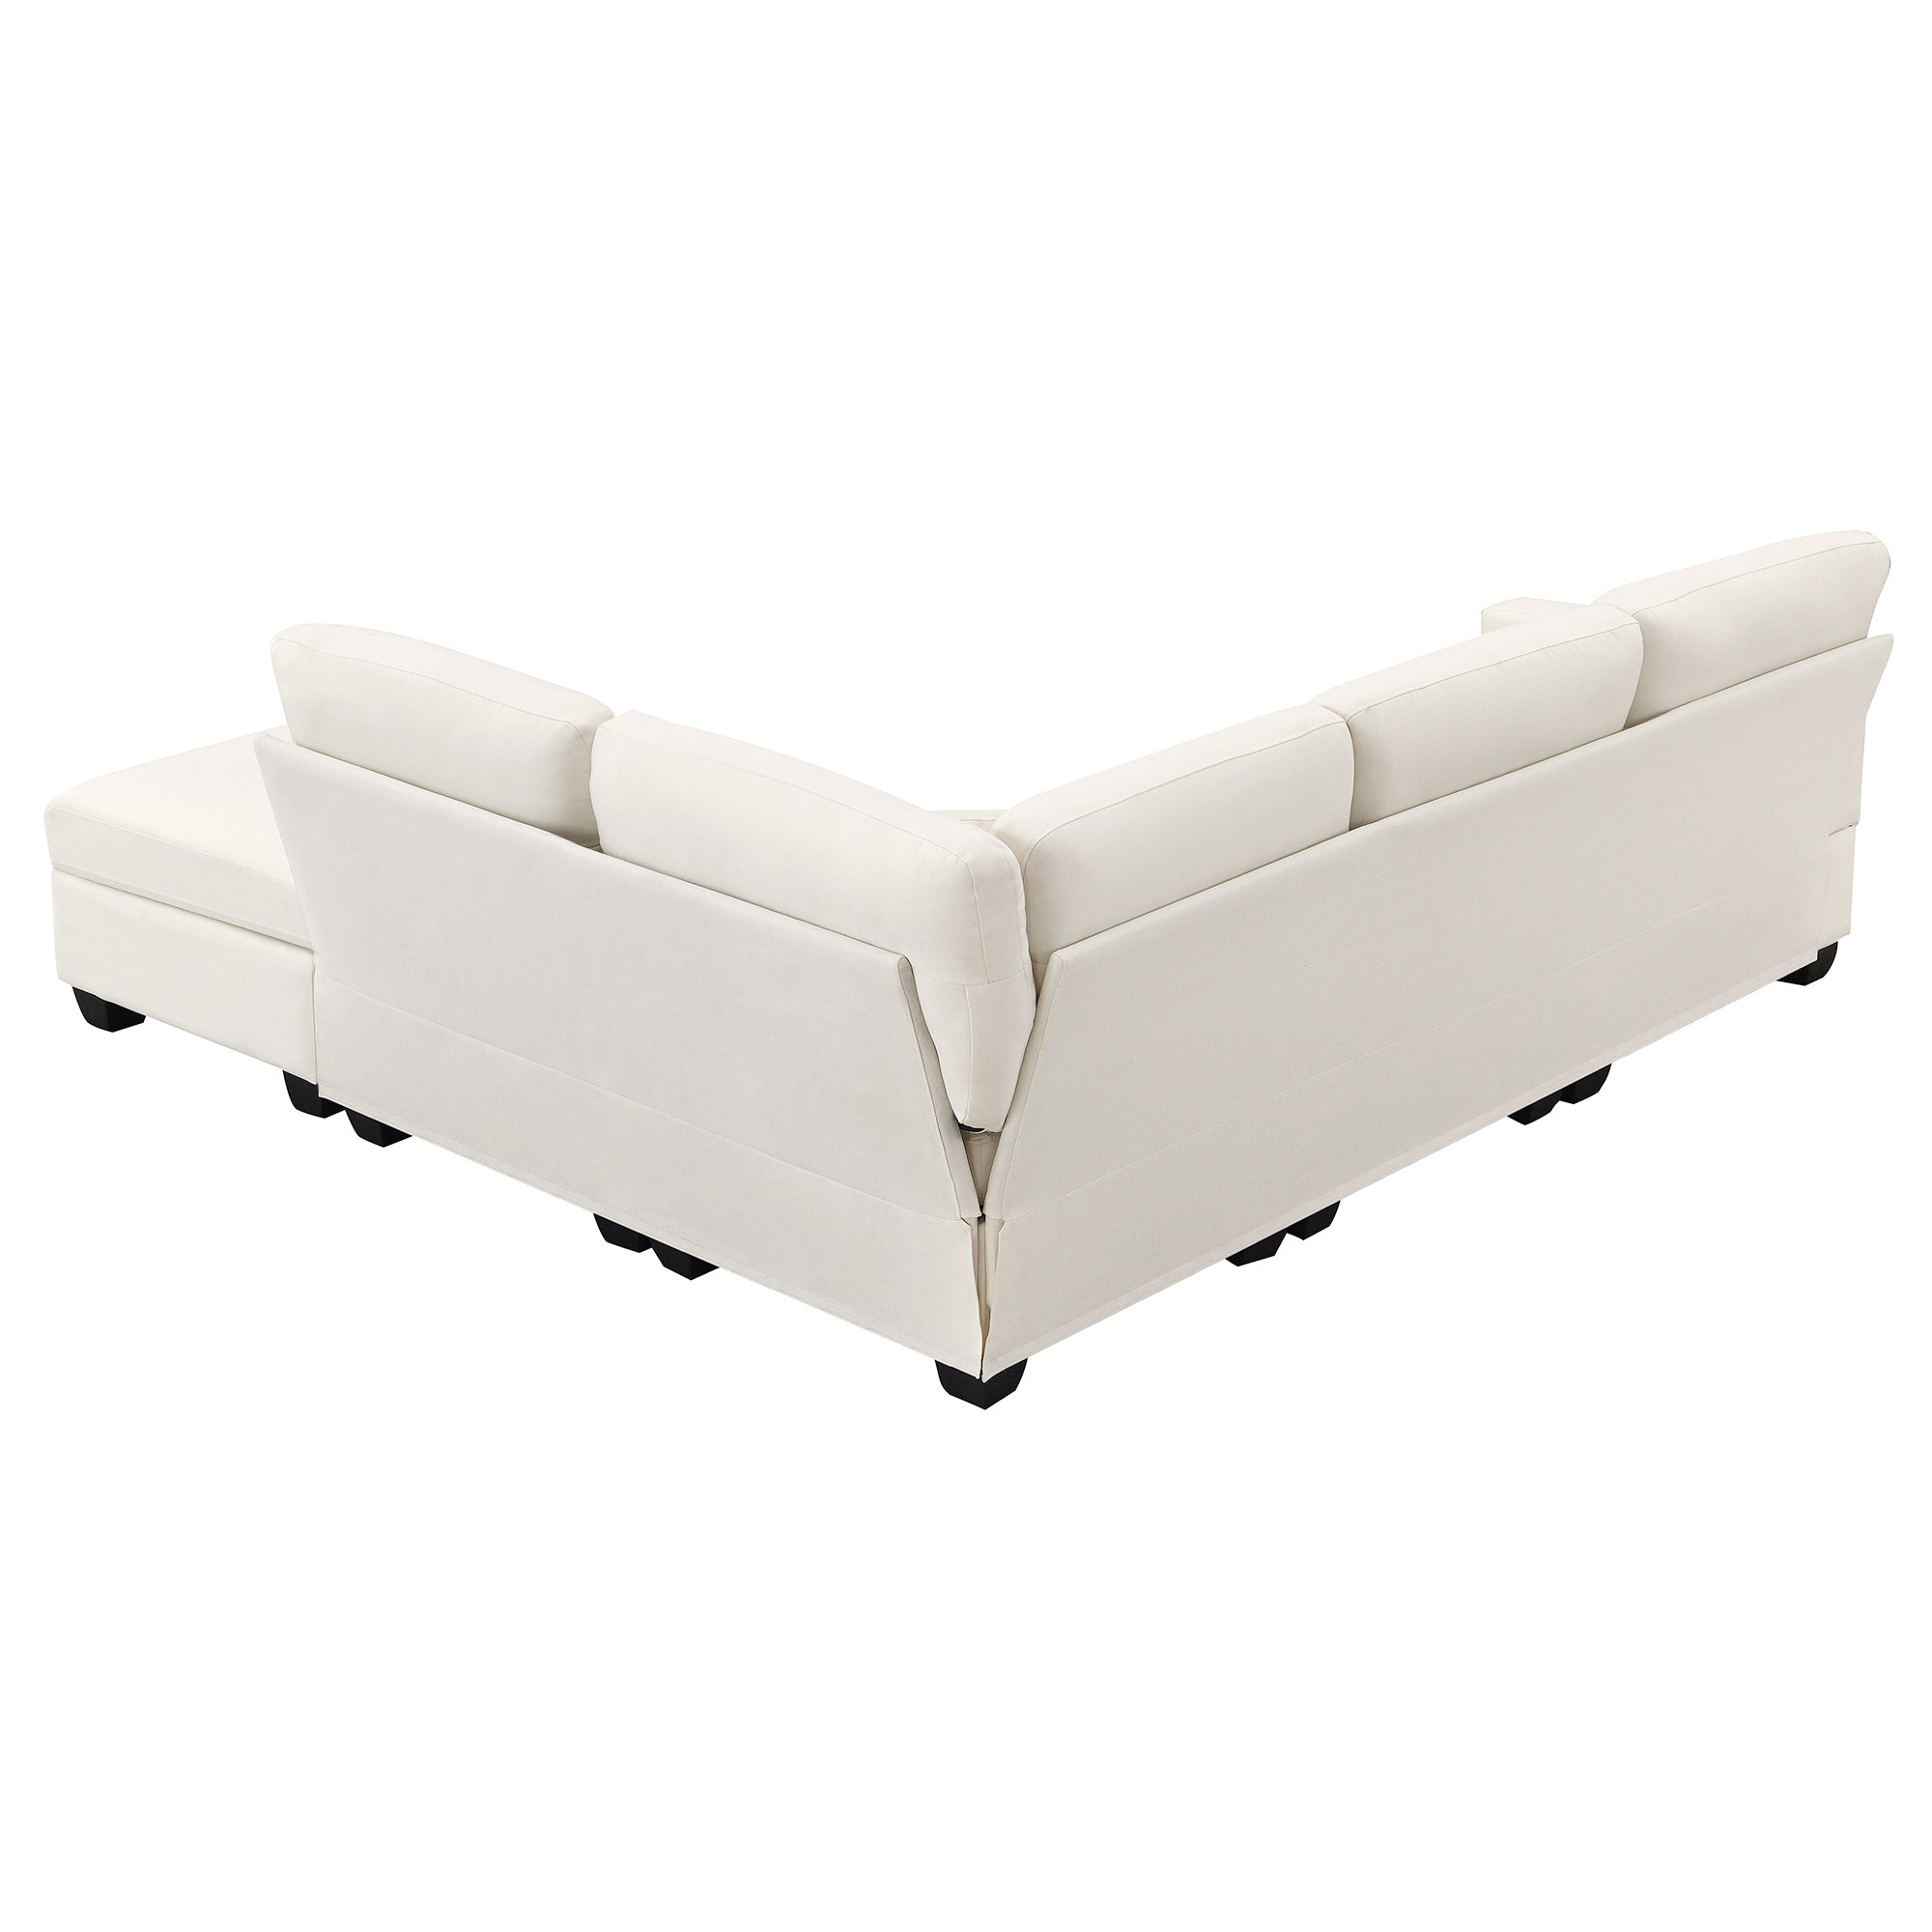 Linen L-Shaped Sectional Sofa with Convertible Ottoman – Beige-Stationary Sectionals-American Furniture Outlet